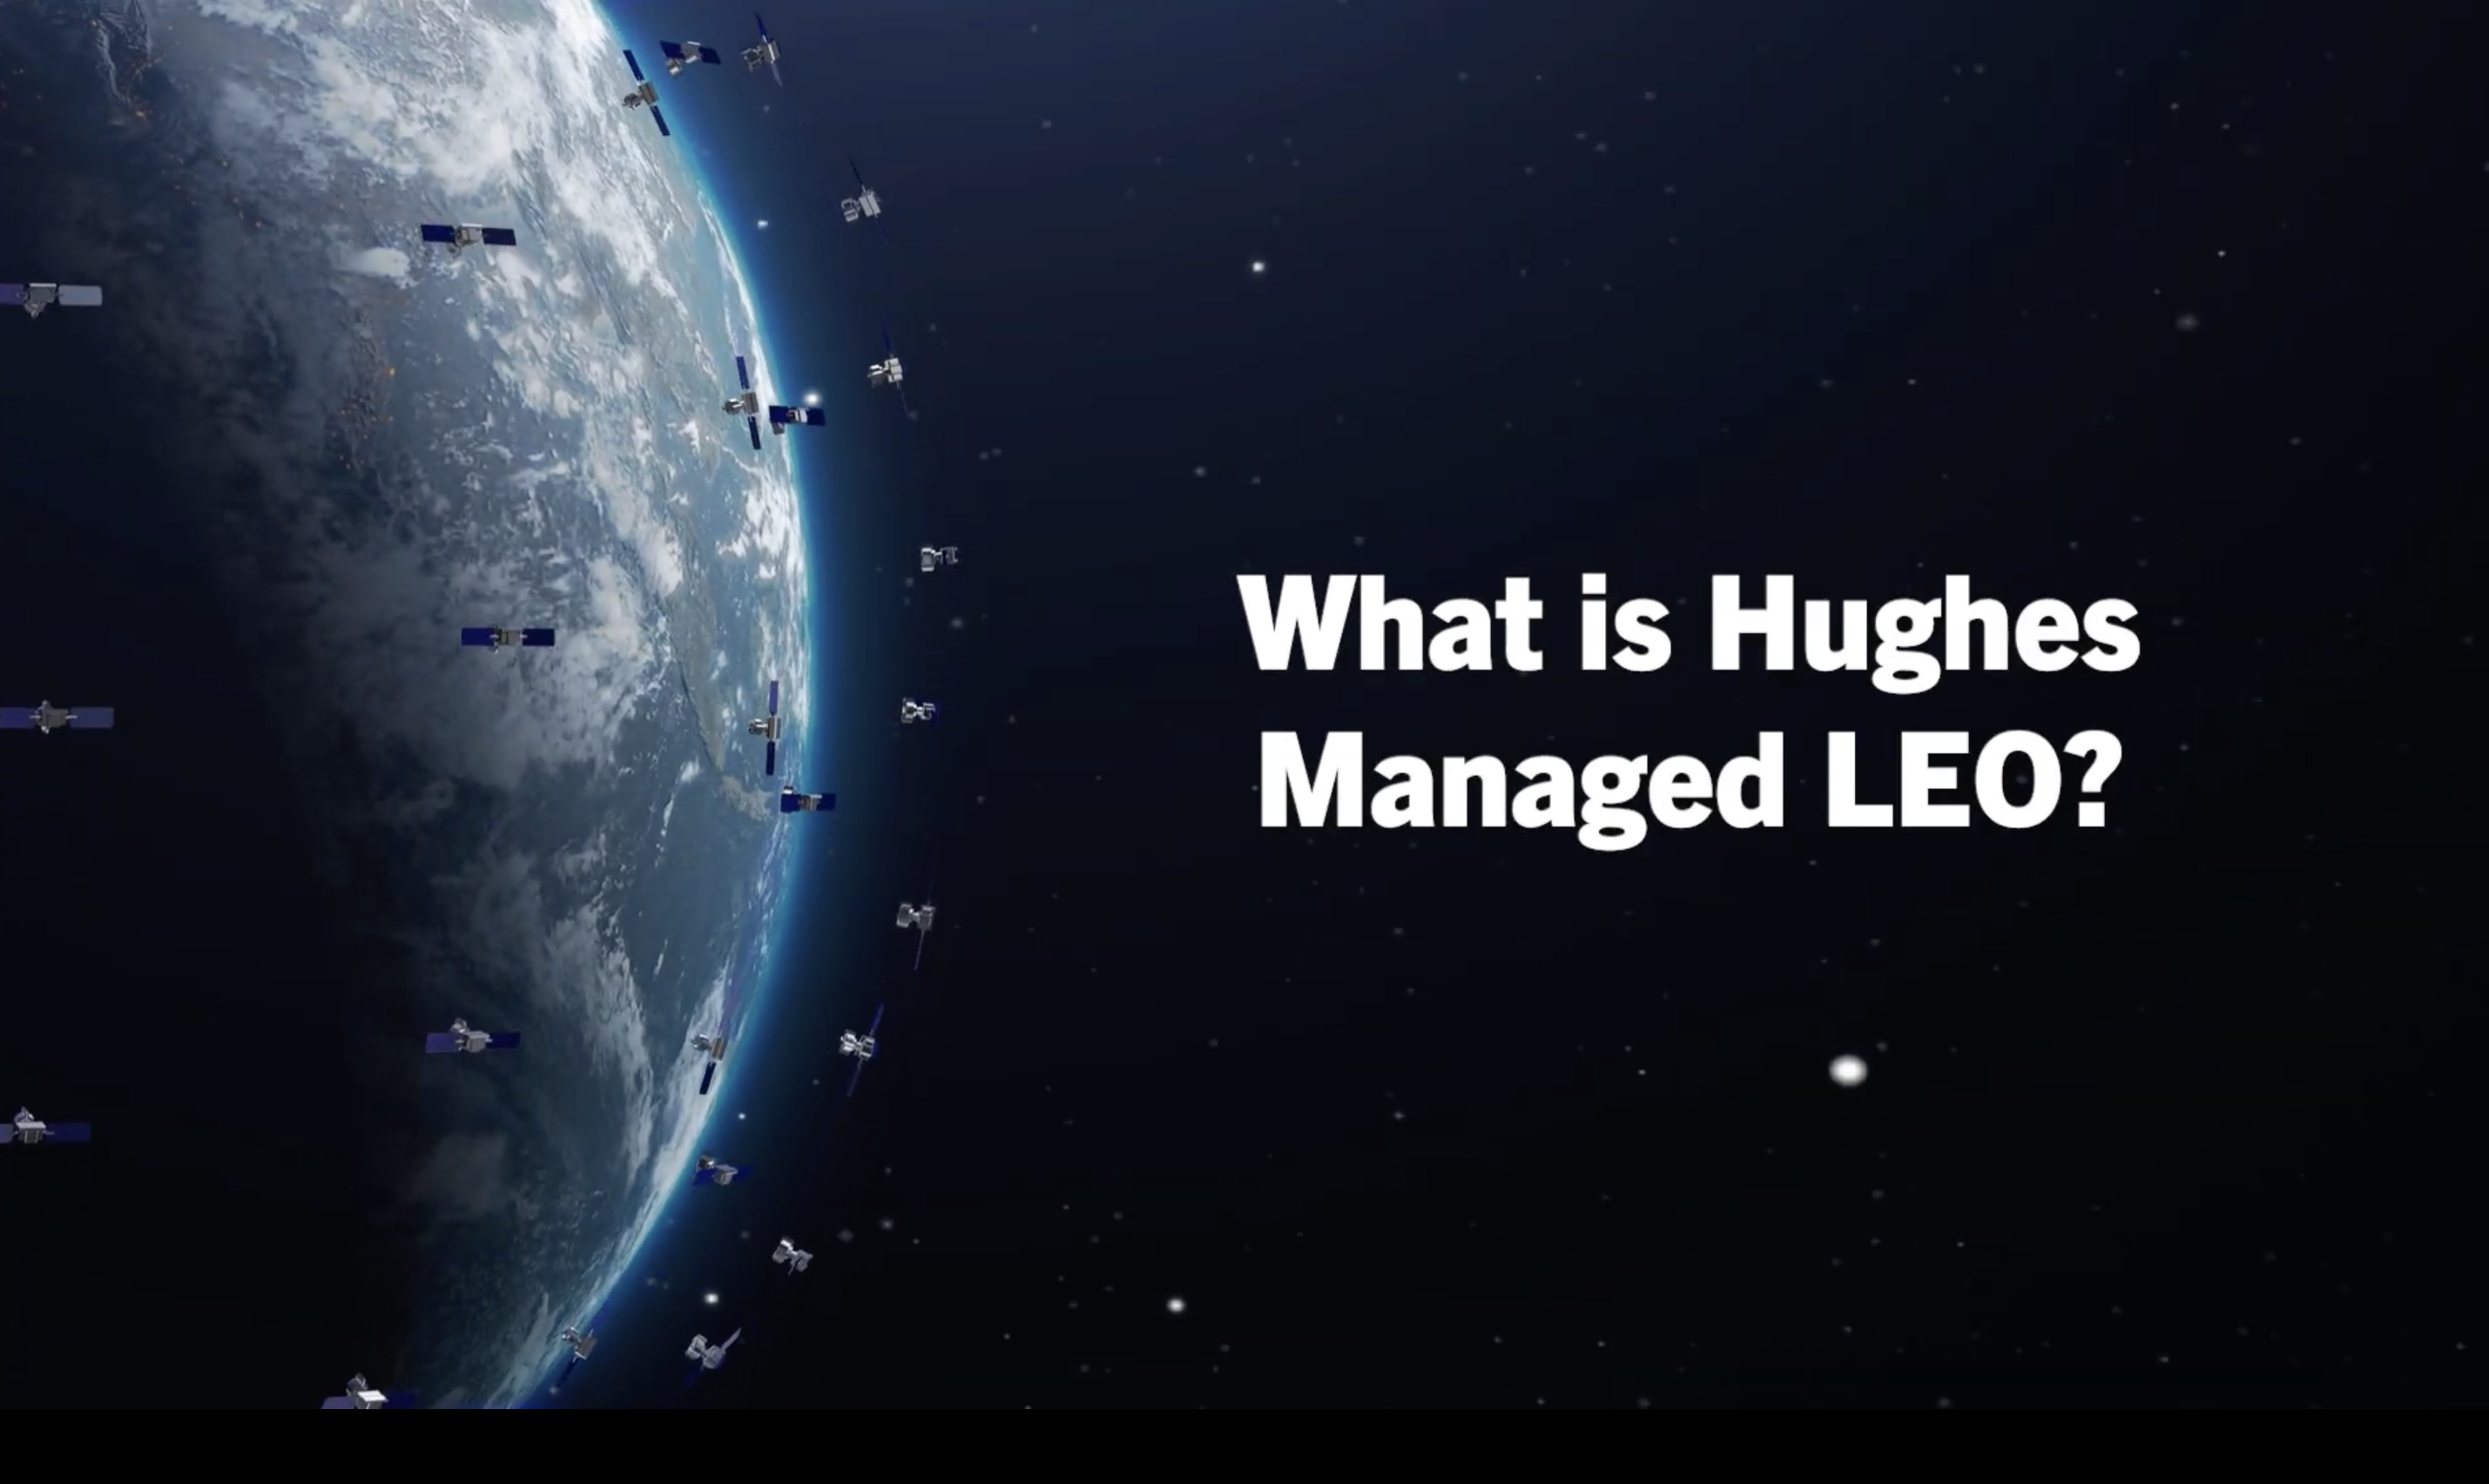 What is Hughes Managed LEO?